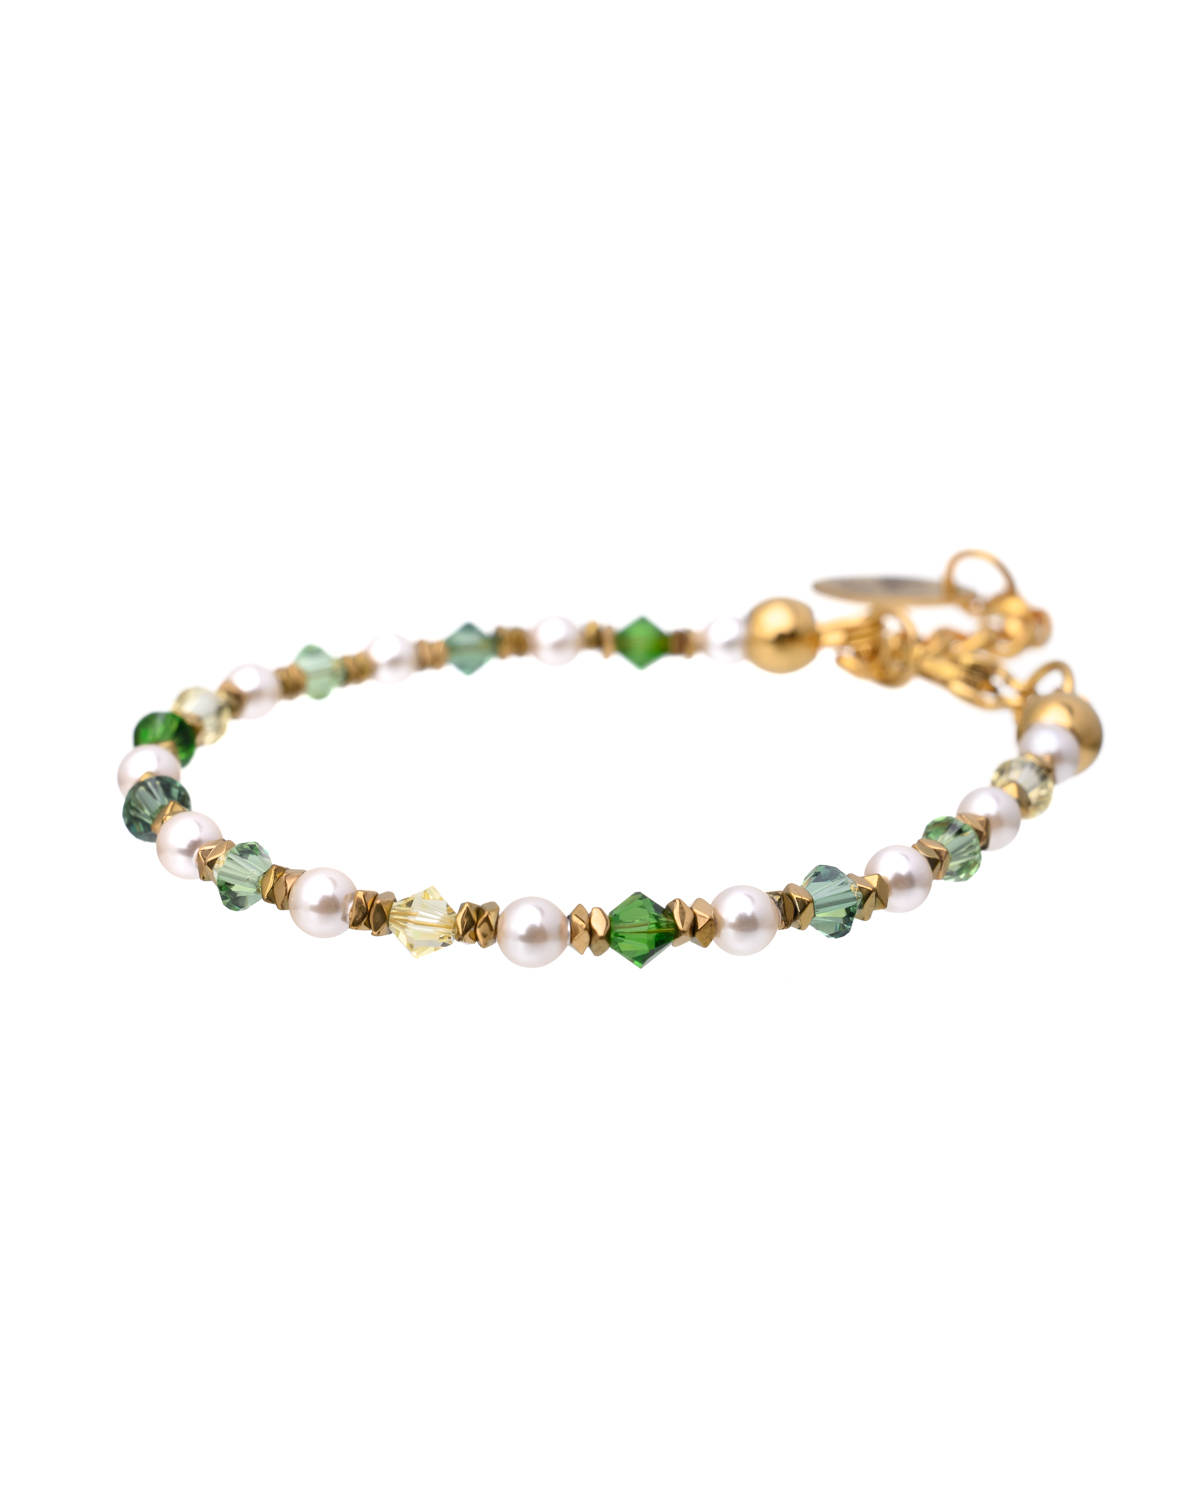 Crystal and Pearls Bracelet - Green tones